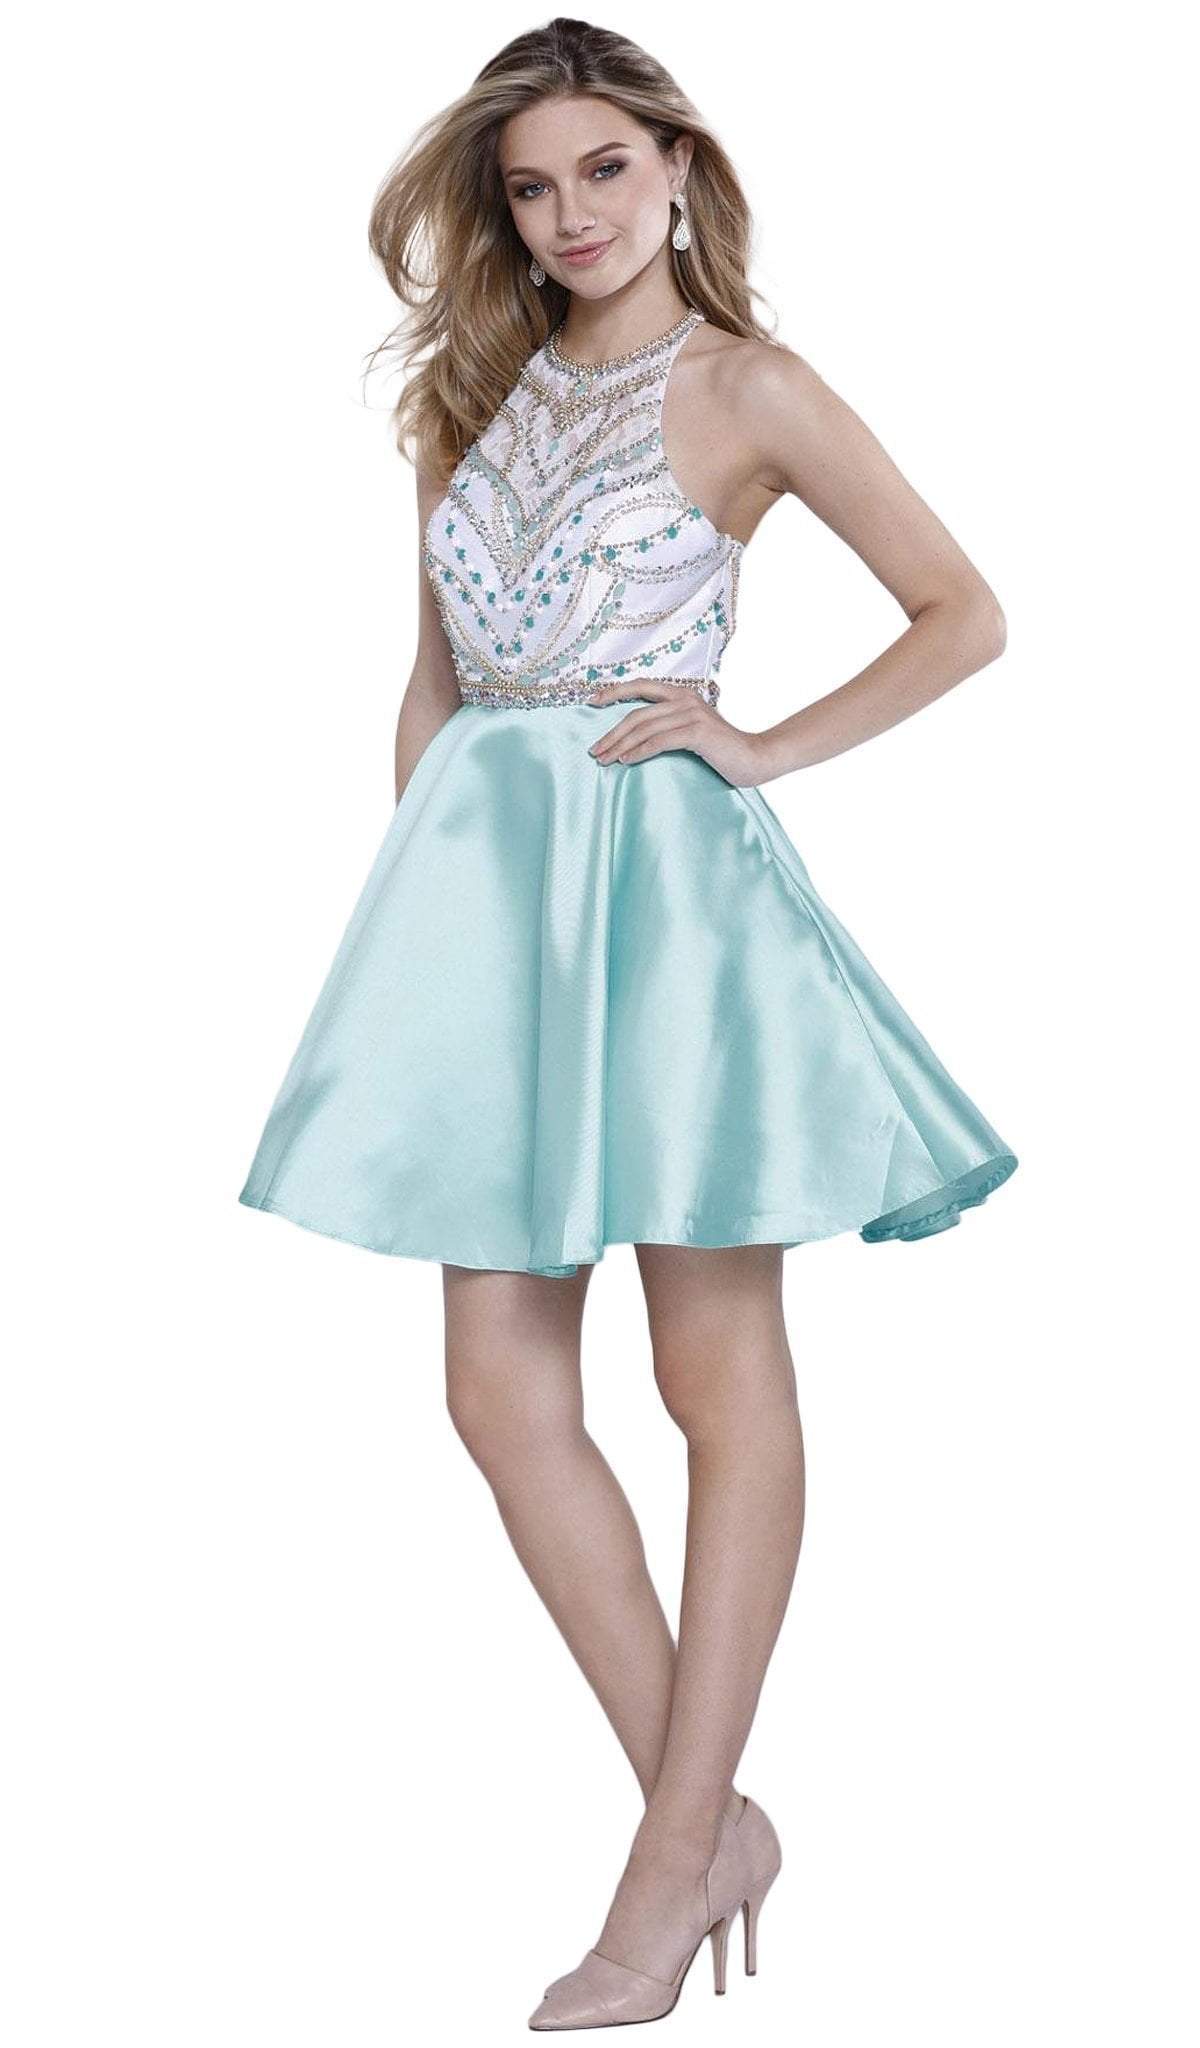 Nox Anabel - 6247 Beaded High Halter Illusion Satin Short Cocktail Dress Special Occasion Dress XS / Mint Green & White